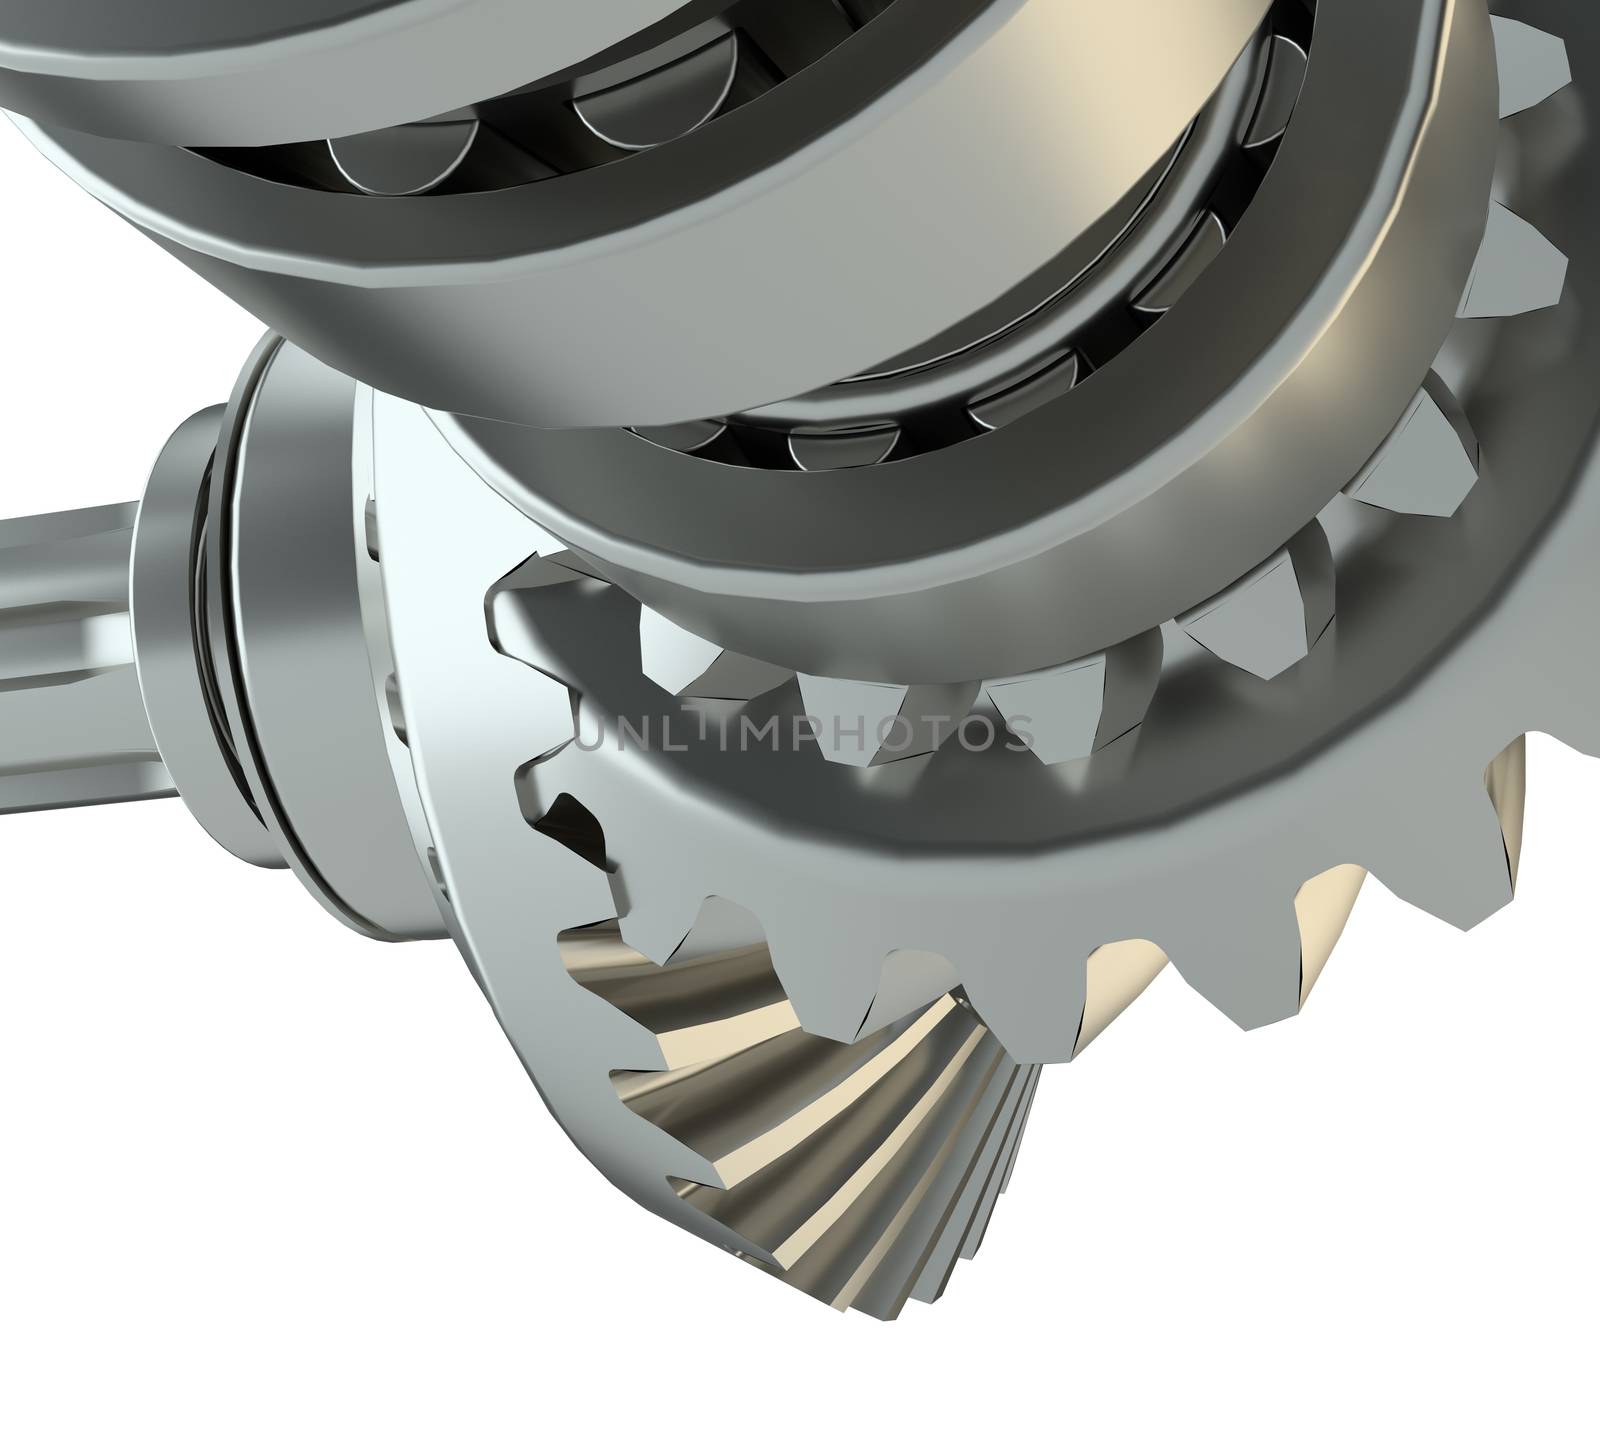 Cog gears mechanism concept. 3d illustration. Isolated on white